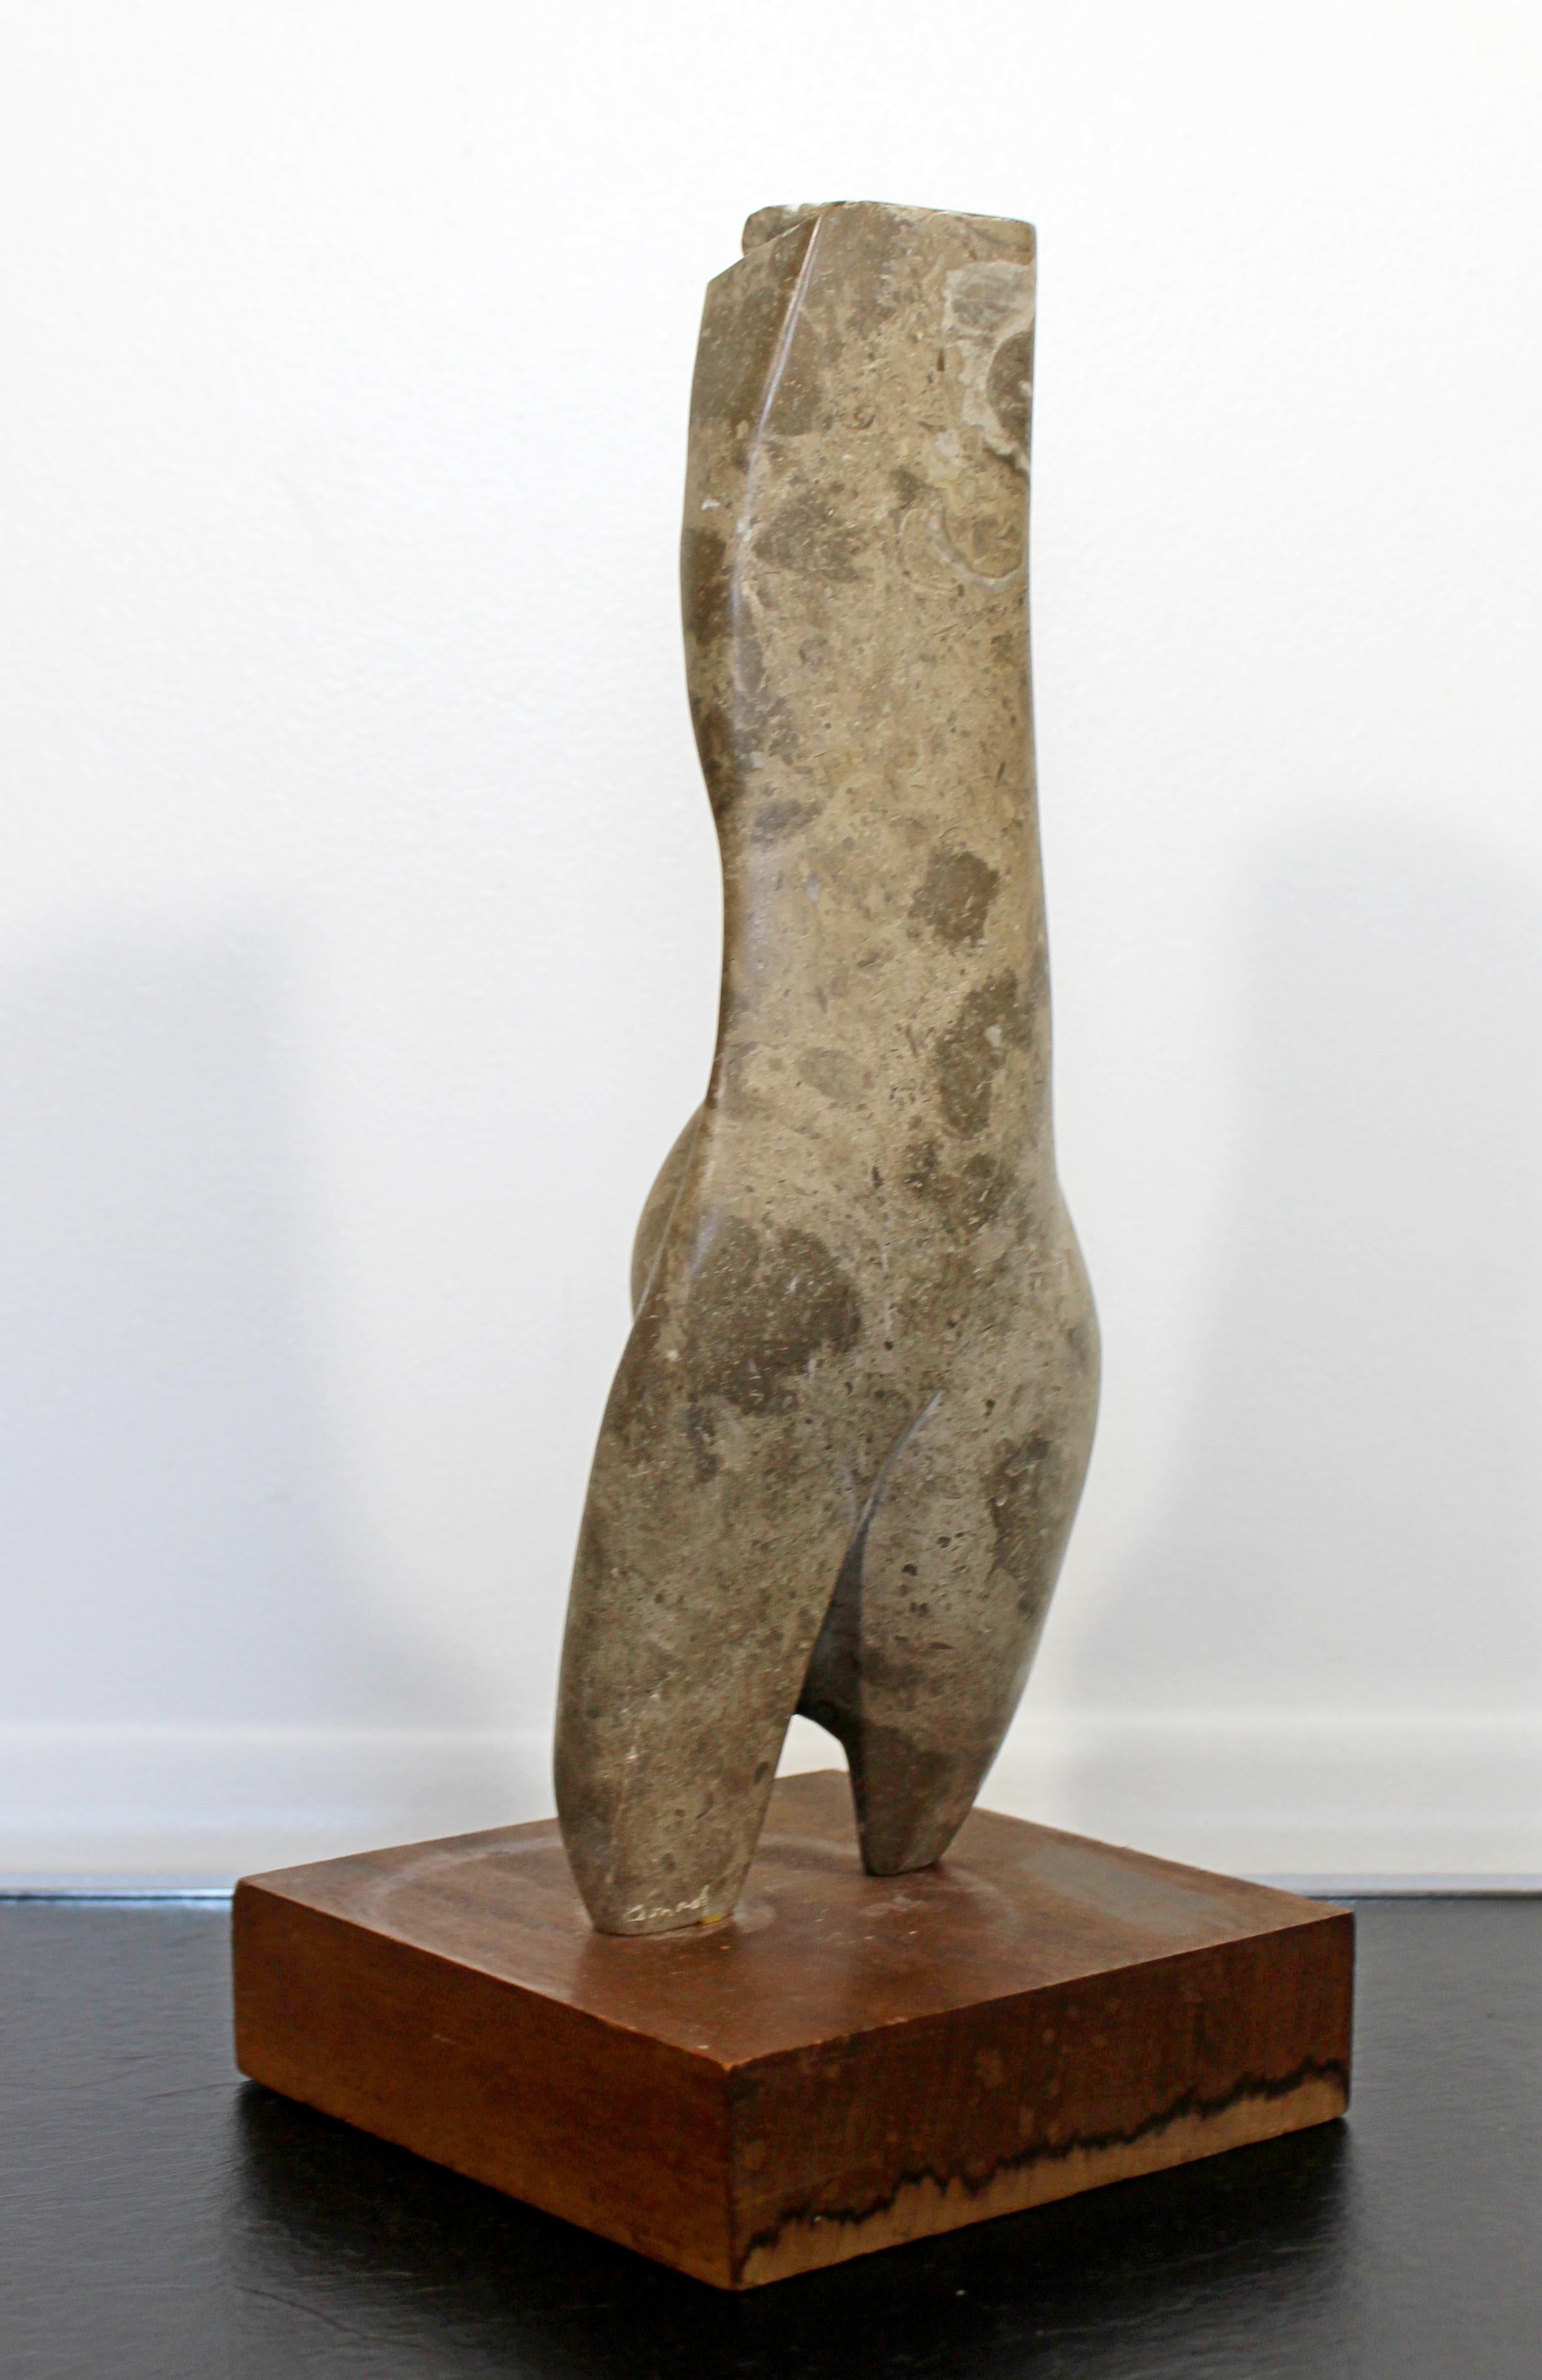 For your consideration is a wonderful, abstract stone sculpture, on a wood base, signed by Leonard Schwartz, entitled 